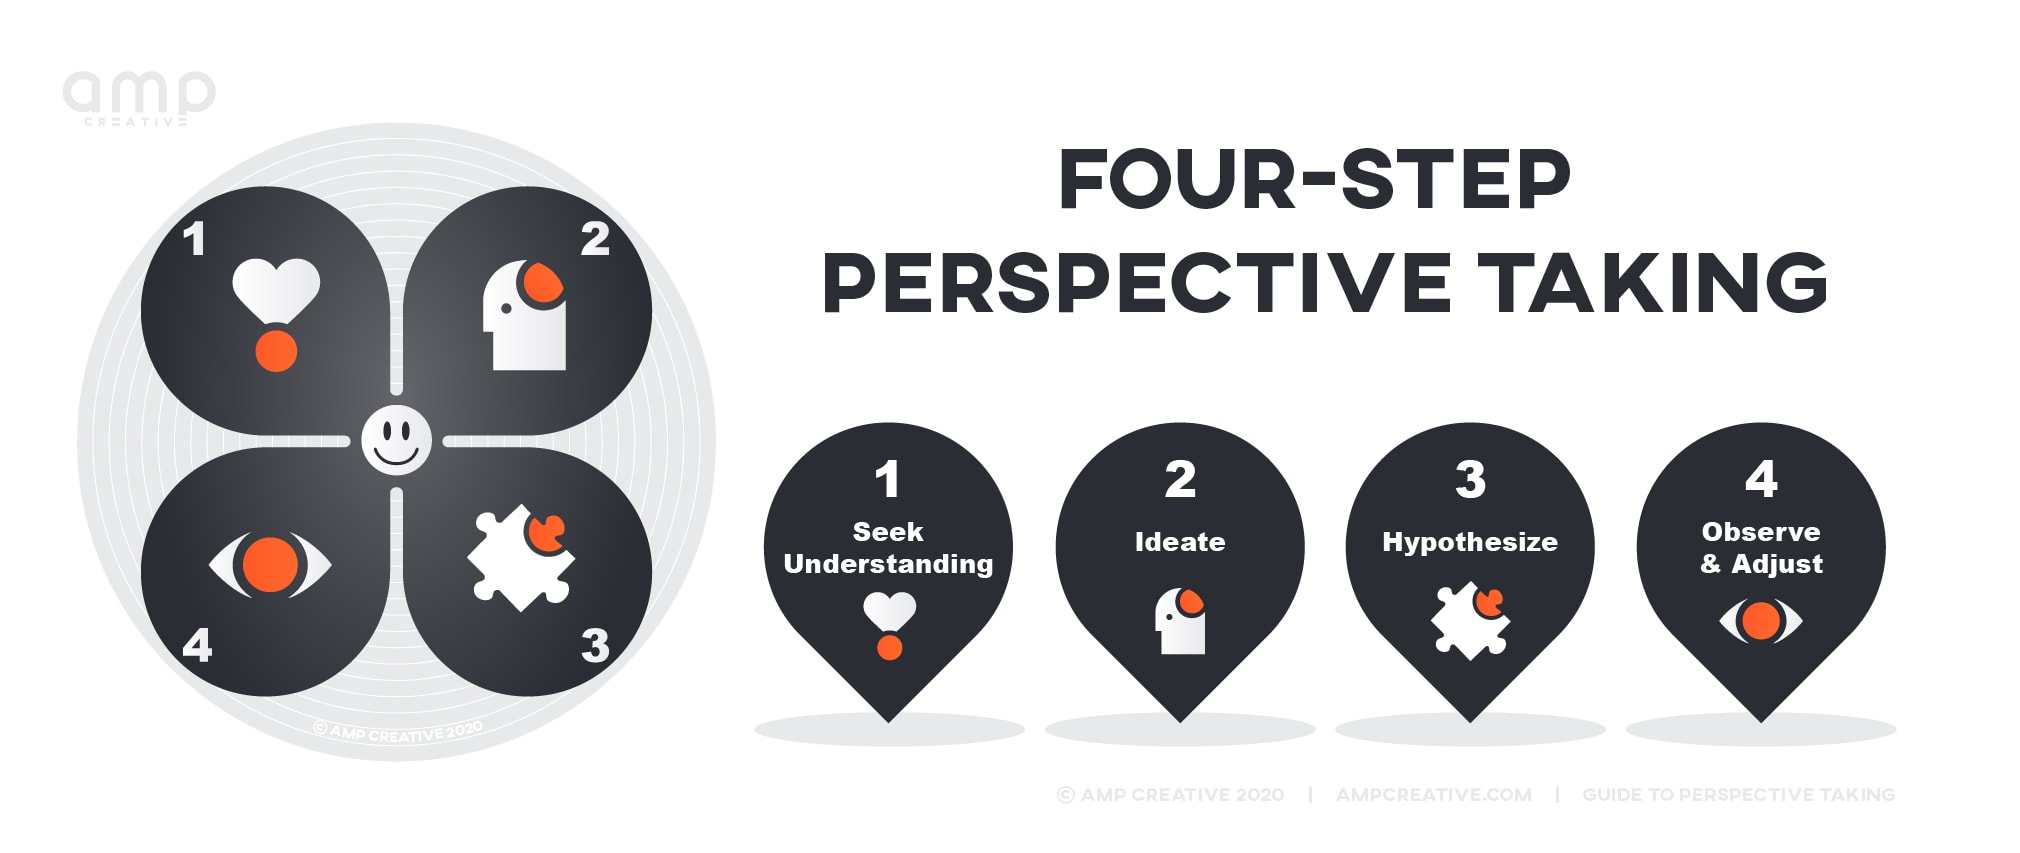 Steps to perspective taking: seek understanding, ideate, hypothesize, and observe and adjust.